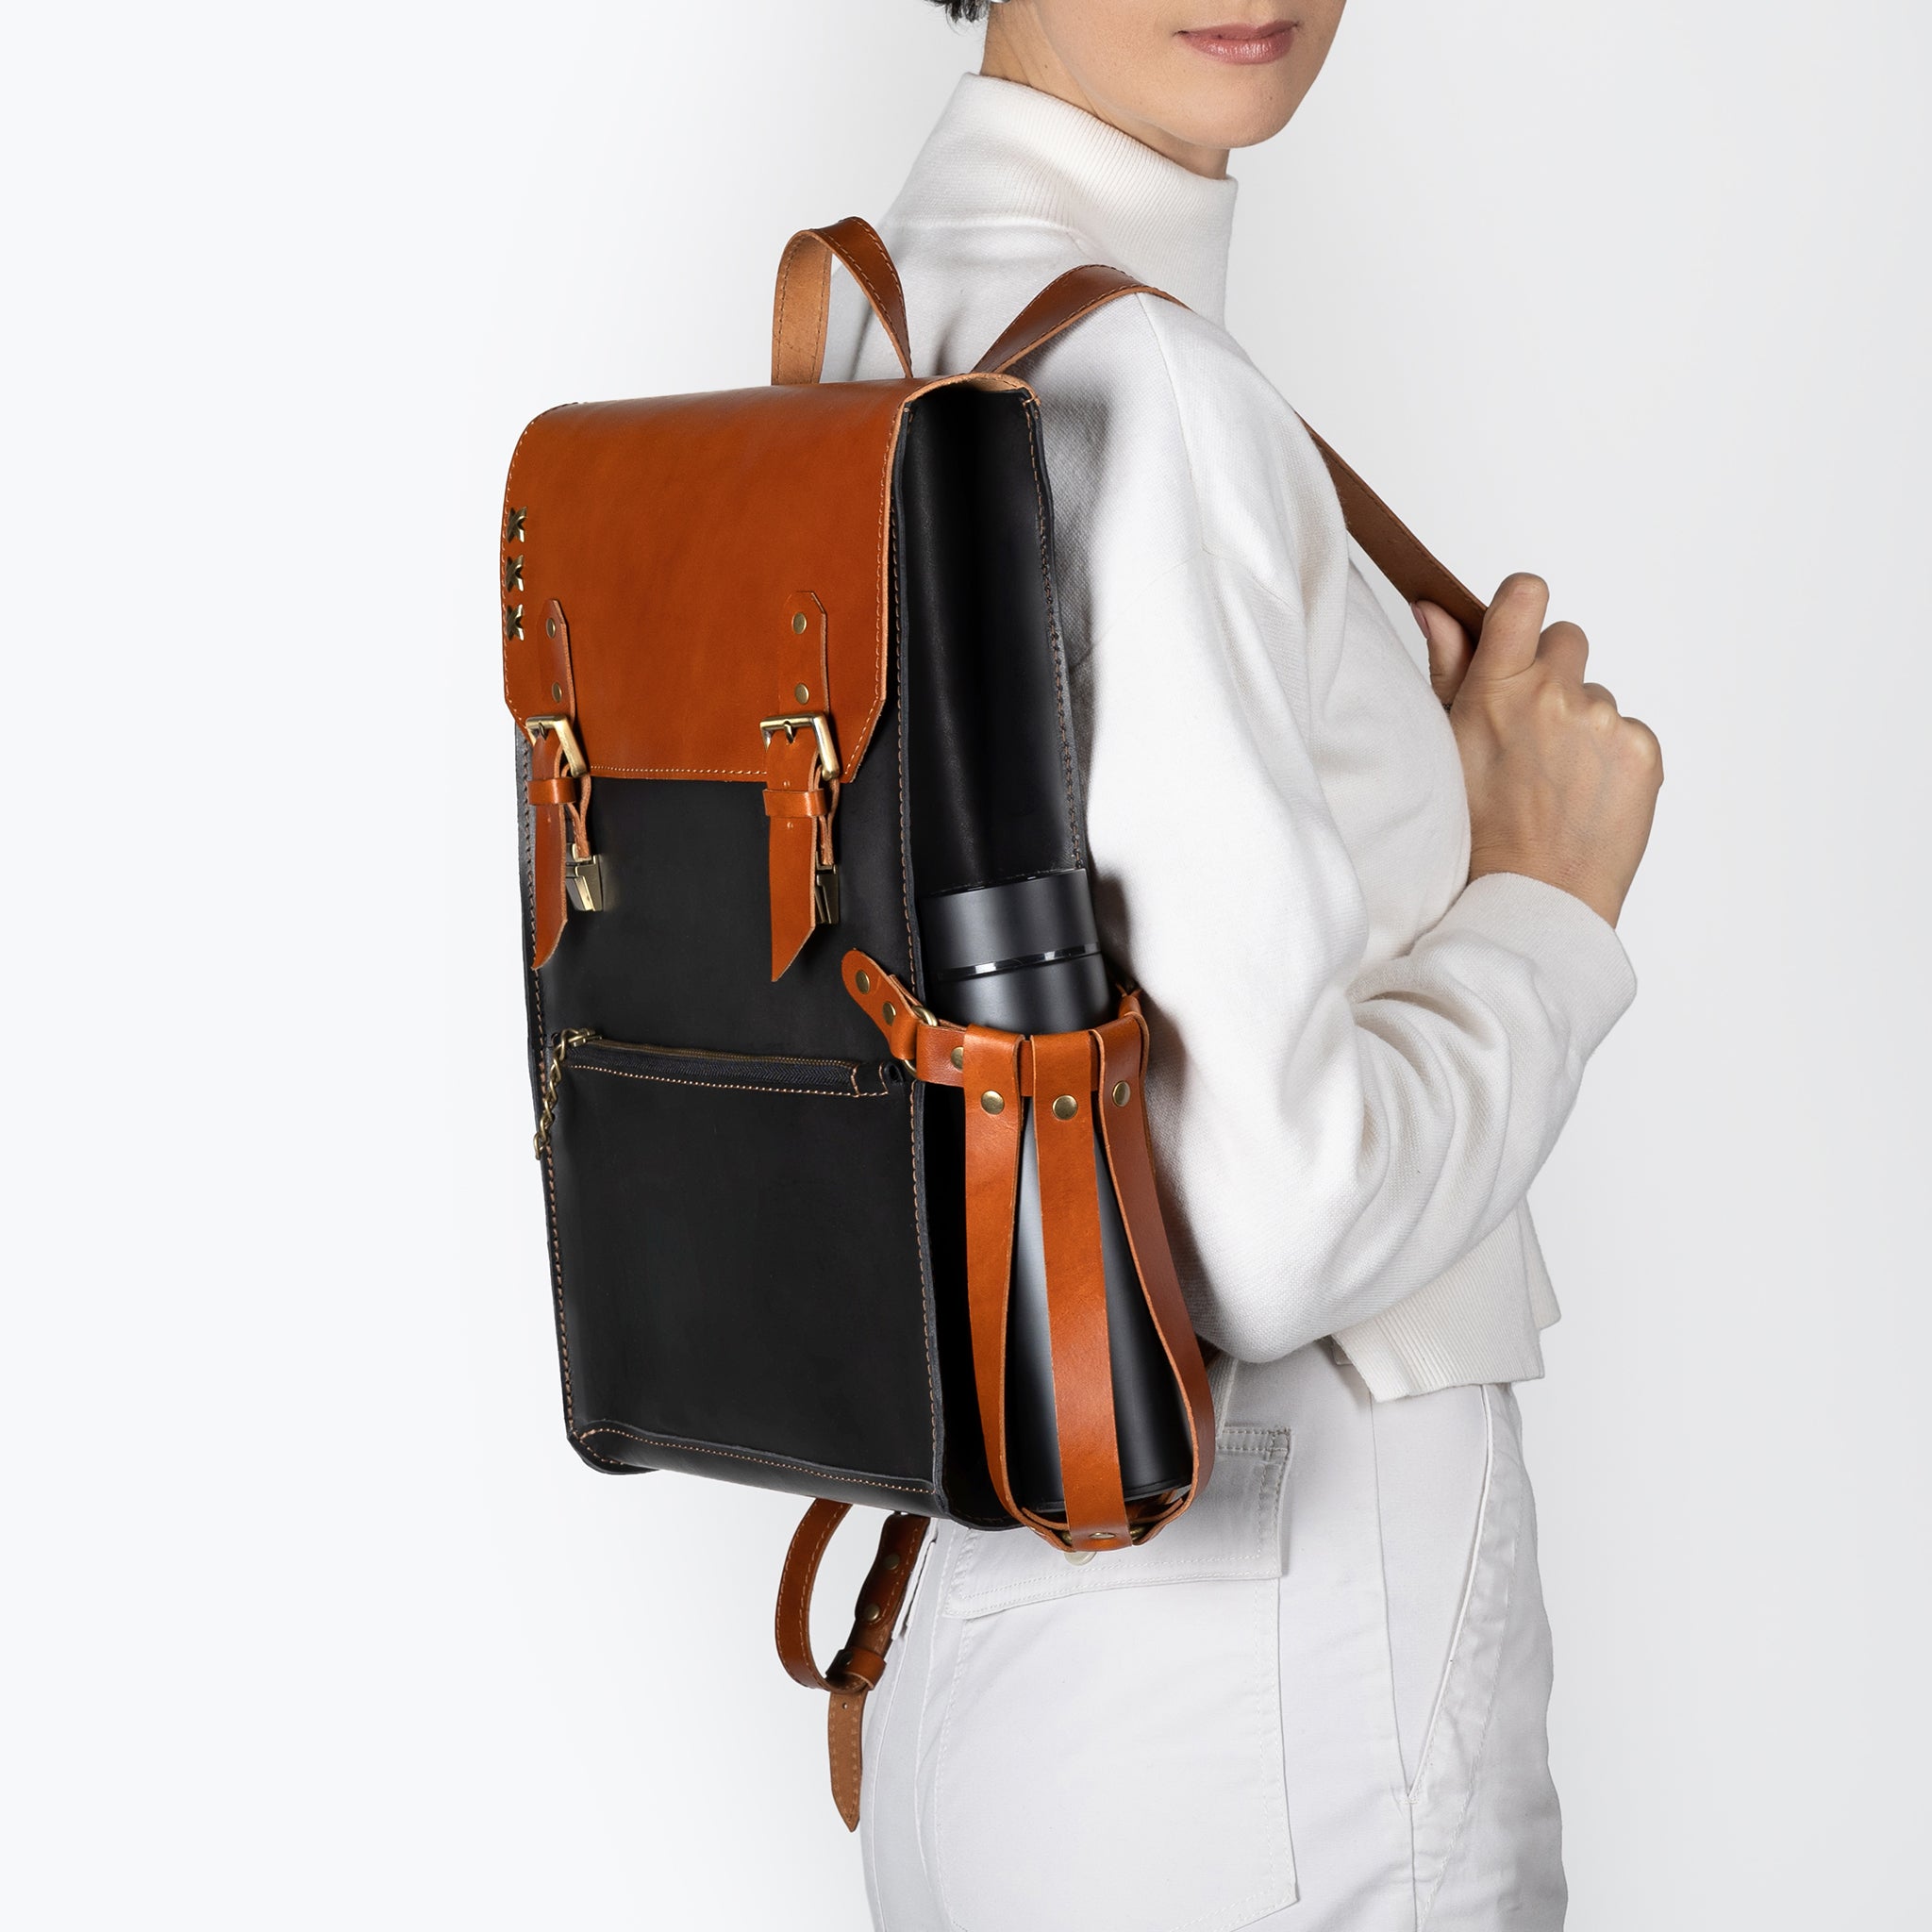 Women's Handcrafting Leather Backpack - Classic Spirit  13", 14", 15" and 16" inch. laptops